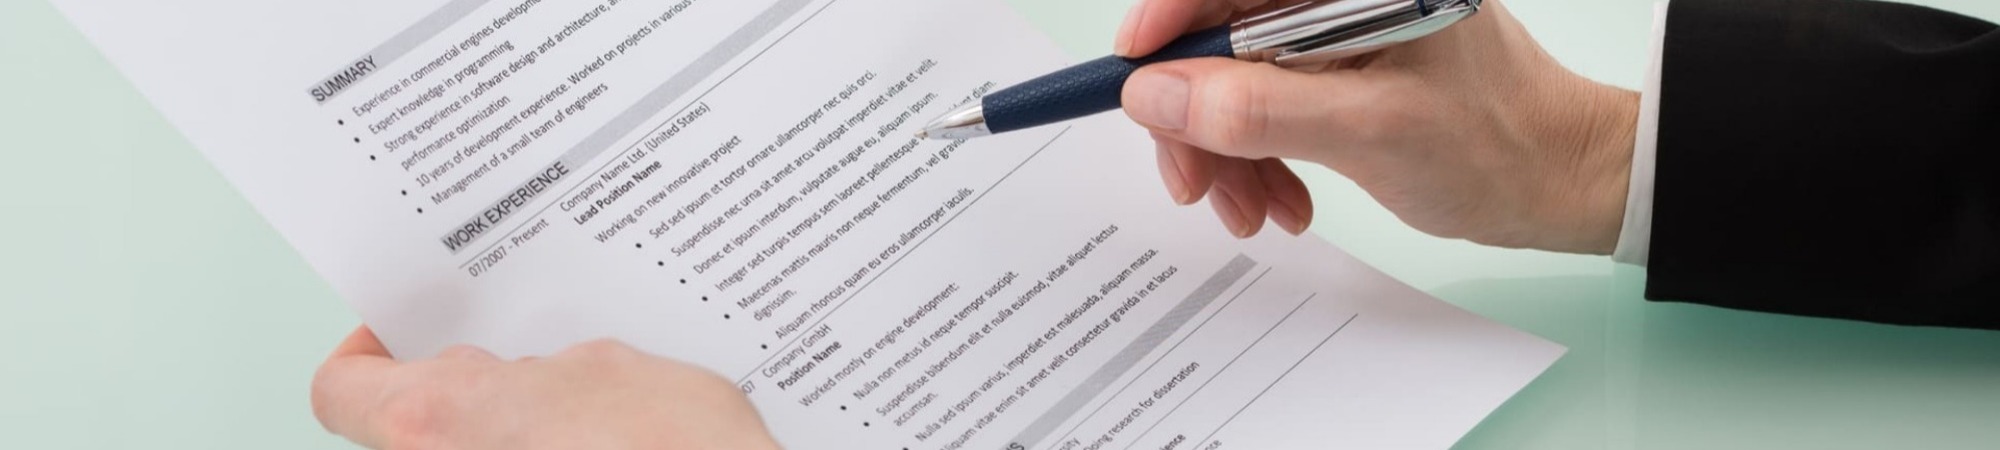 Close-up of a person holding a CV and reviewing with pen